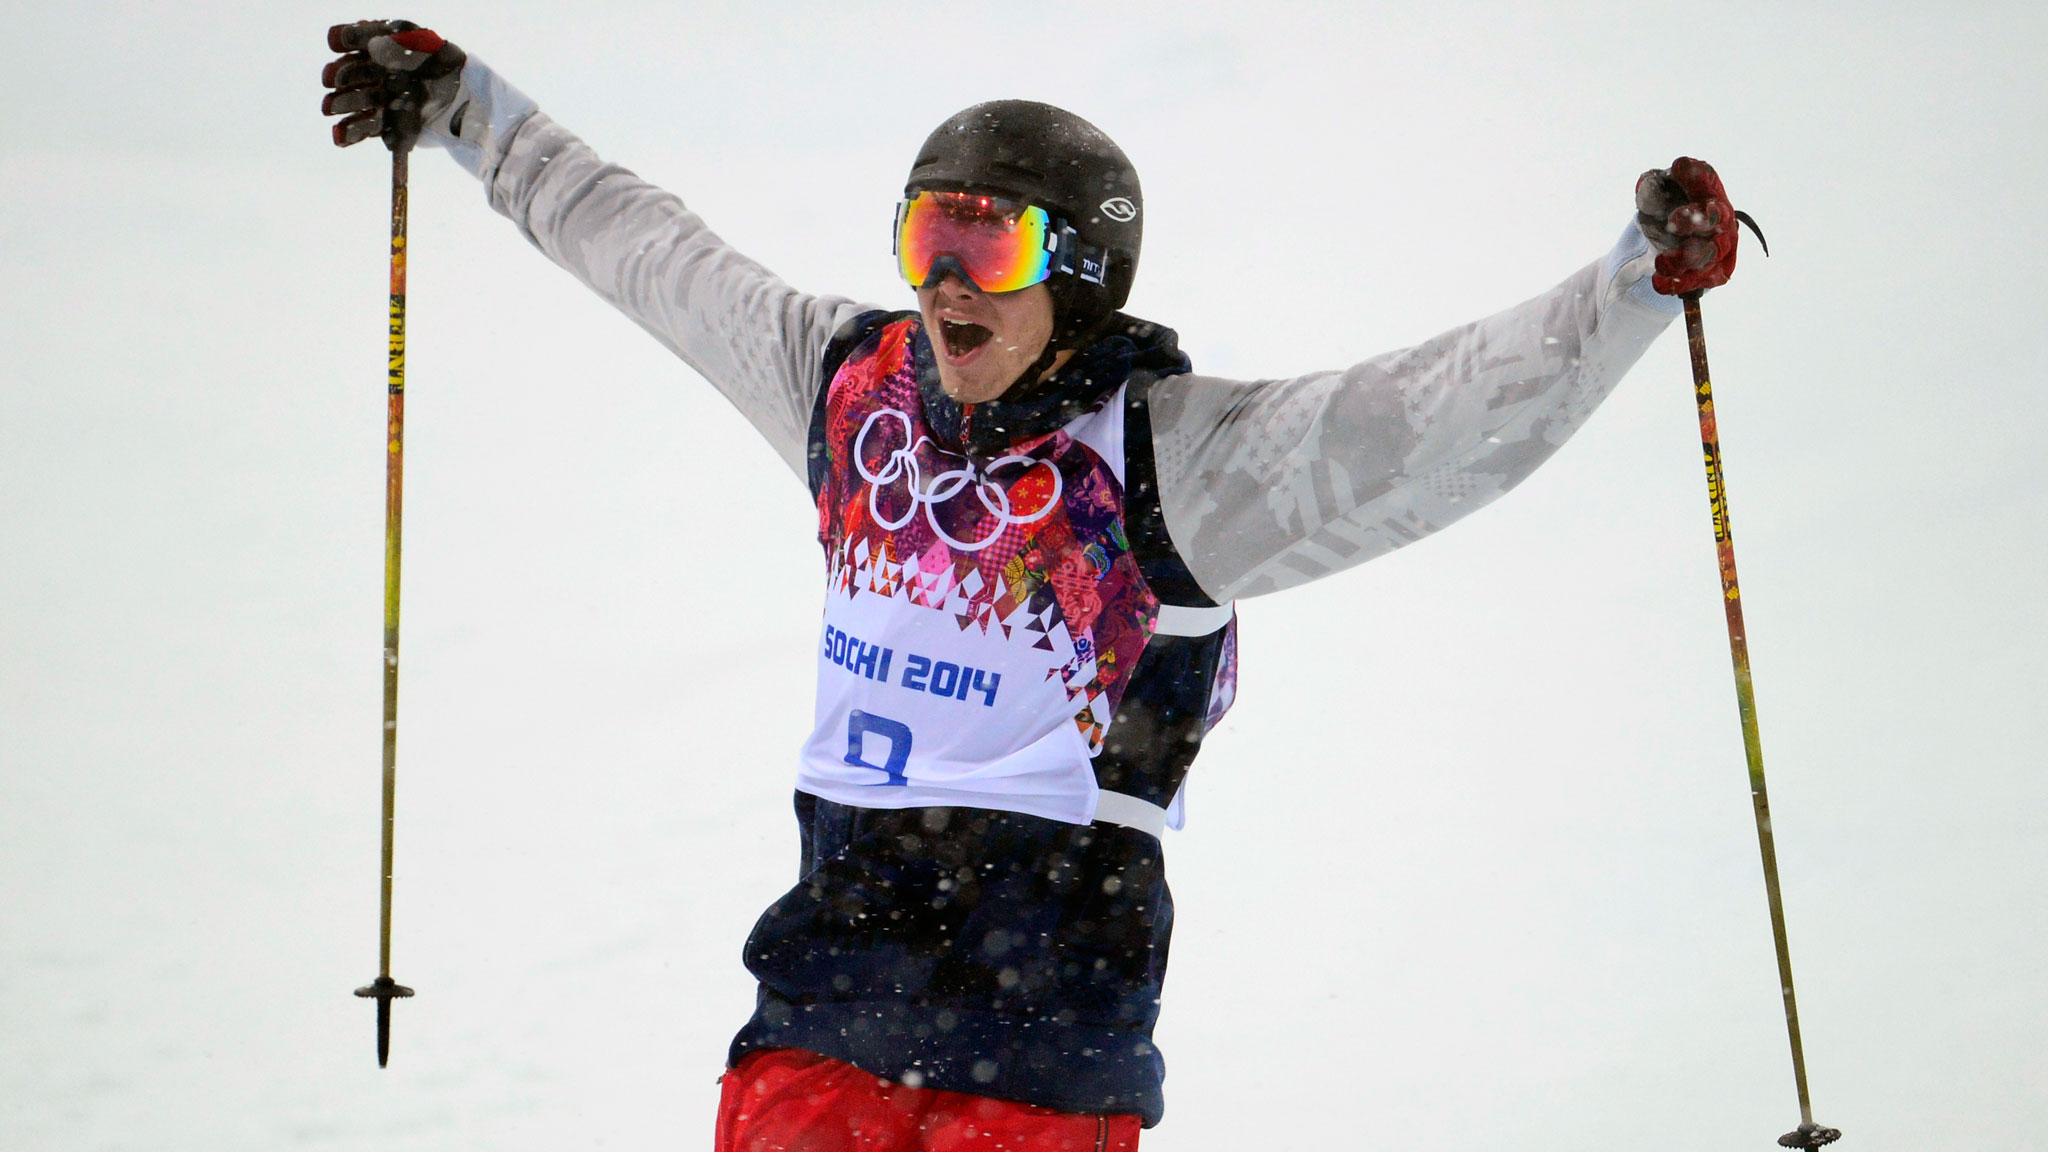 Sochi Games David Wise Wins On Halfpipe For